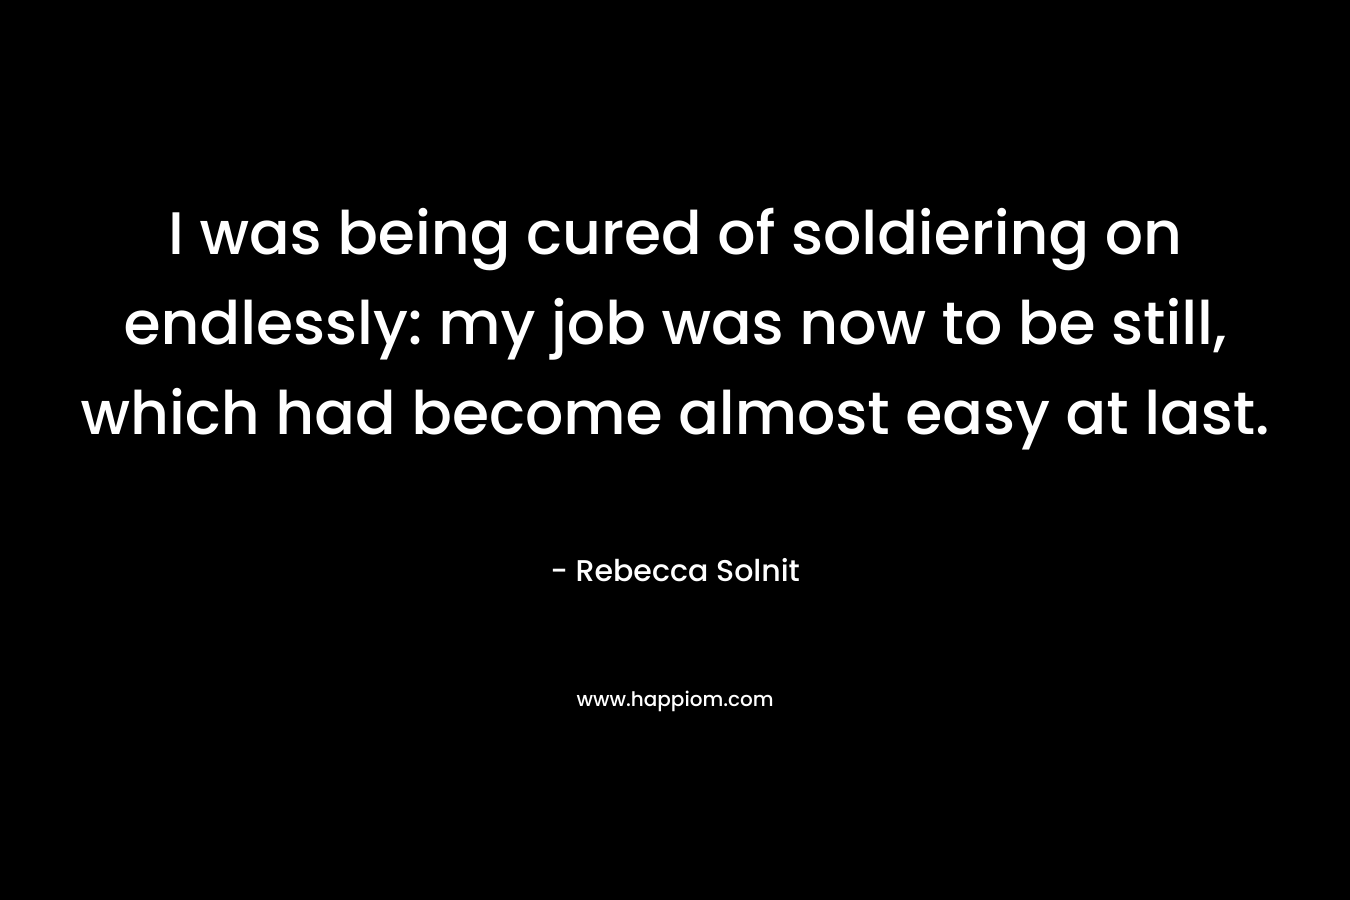 I was being cured of soldiering on endlessly: my job was now to be still, which had become almost easy at last.